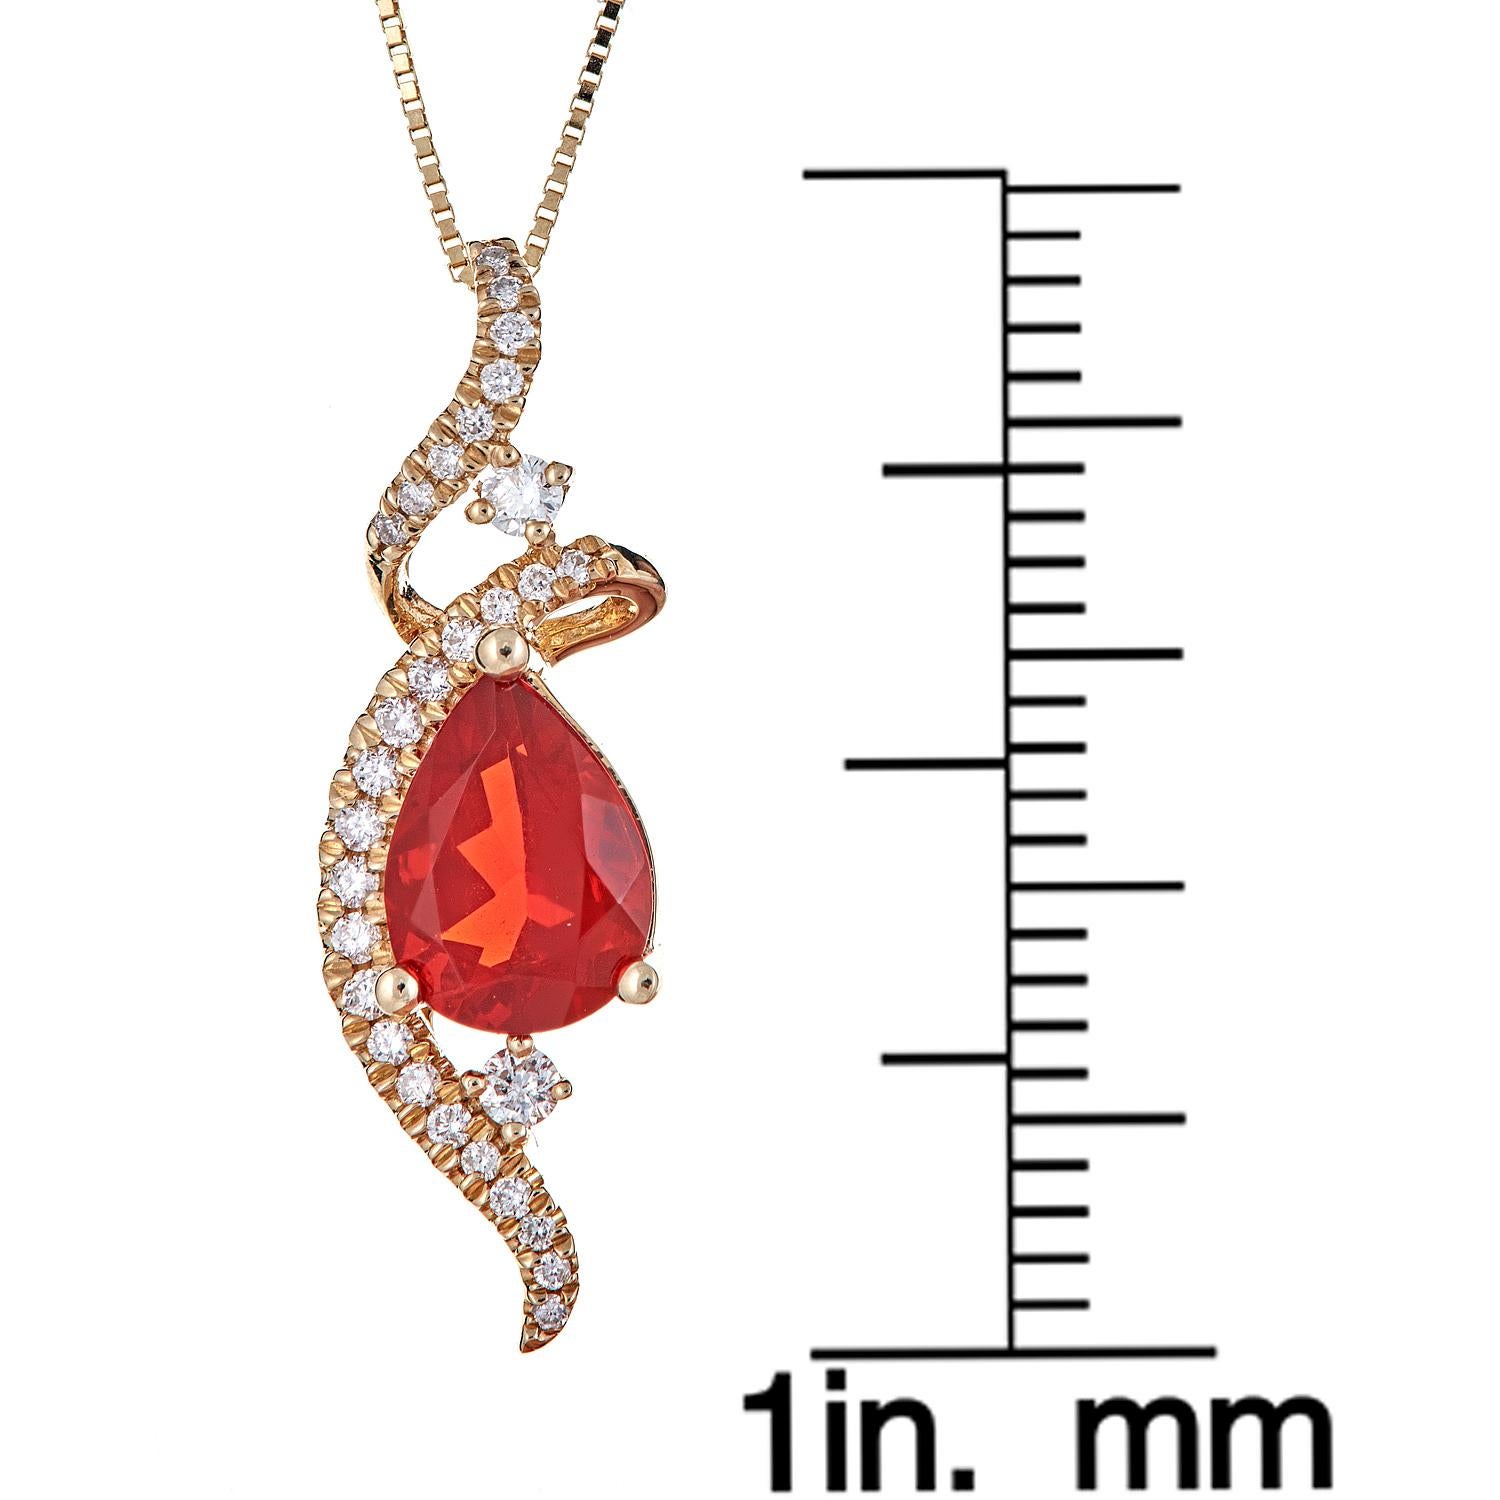 Decorate yourself in elegance with this Pendant is crafted from 14-karat Yellow Gold by Gin & Grace Pendant. This Pendant is made up of 8x6 mm Pear-Cut Prong setting Fire Opal (1 Pcs) 0.75 Carat and Round-Cut Prong setting White Diamond (29 Pcs)